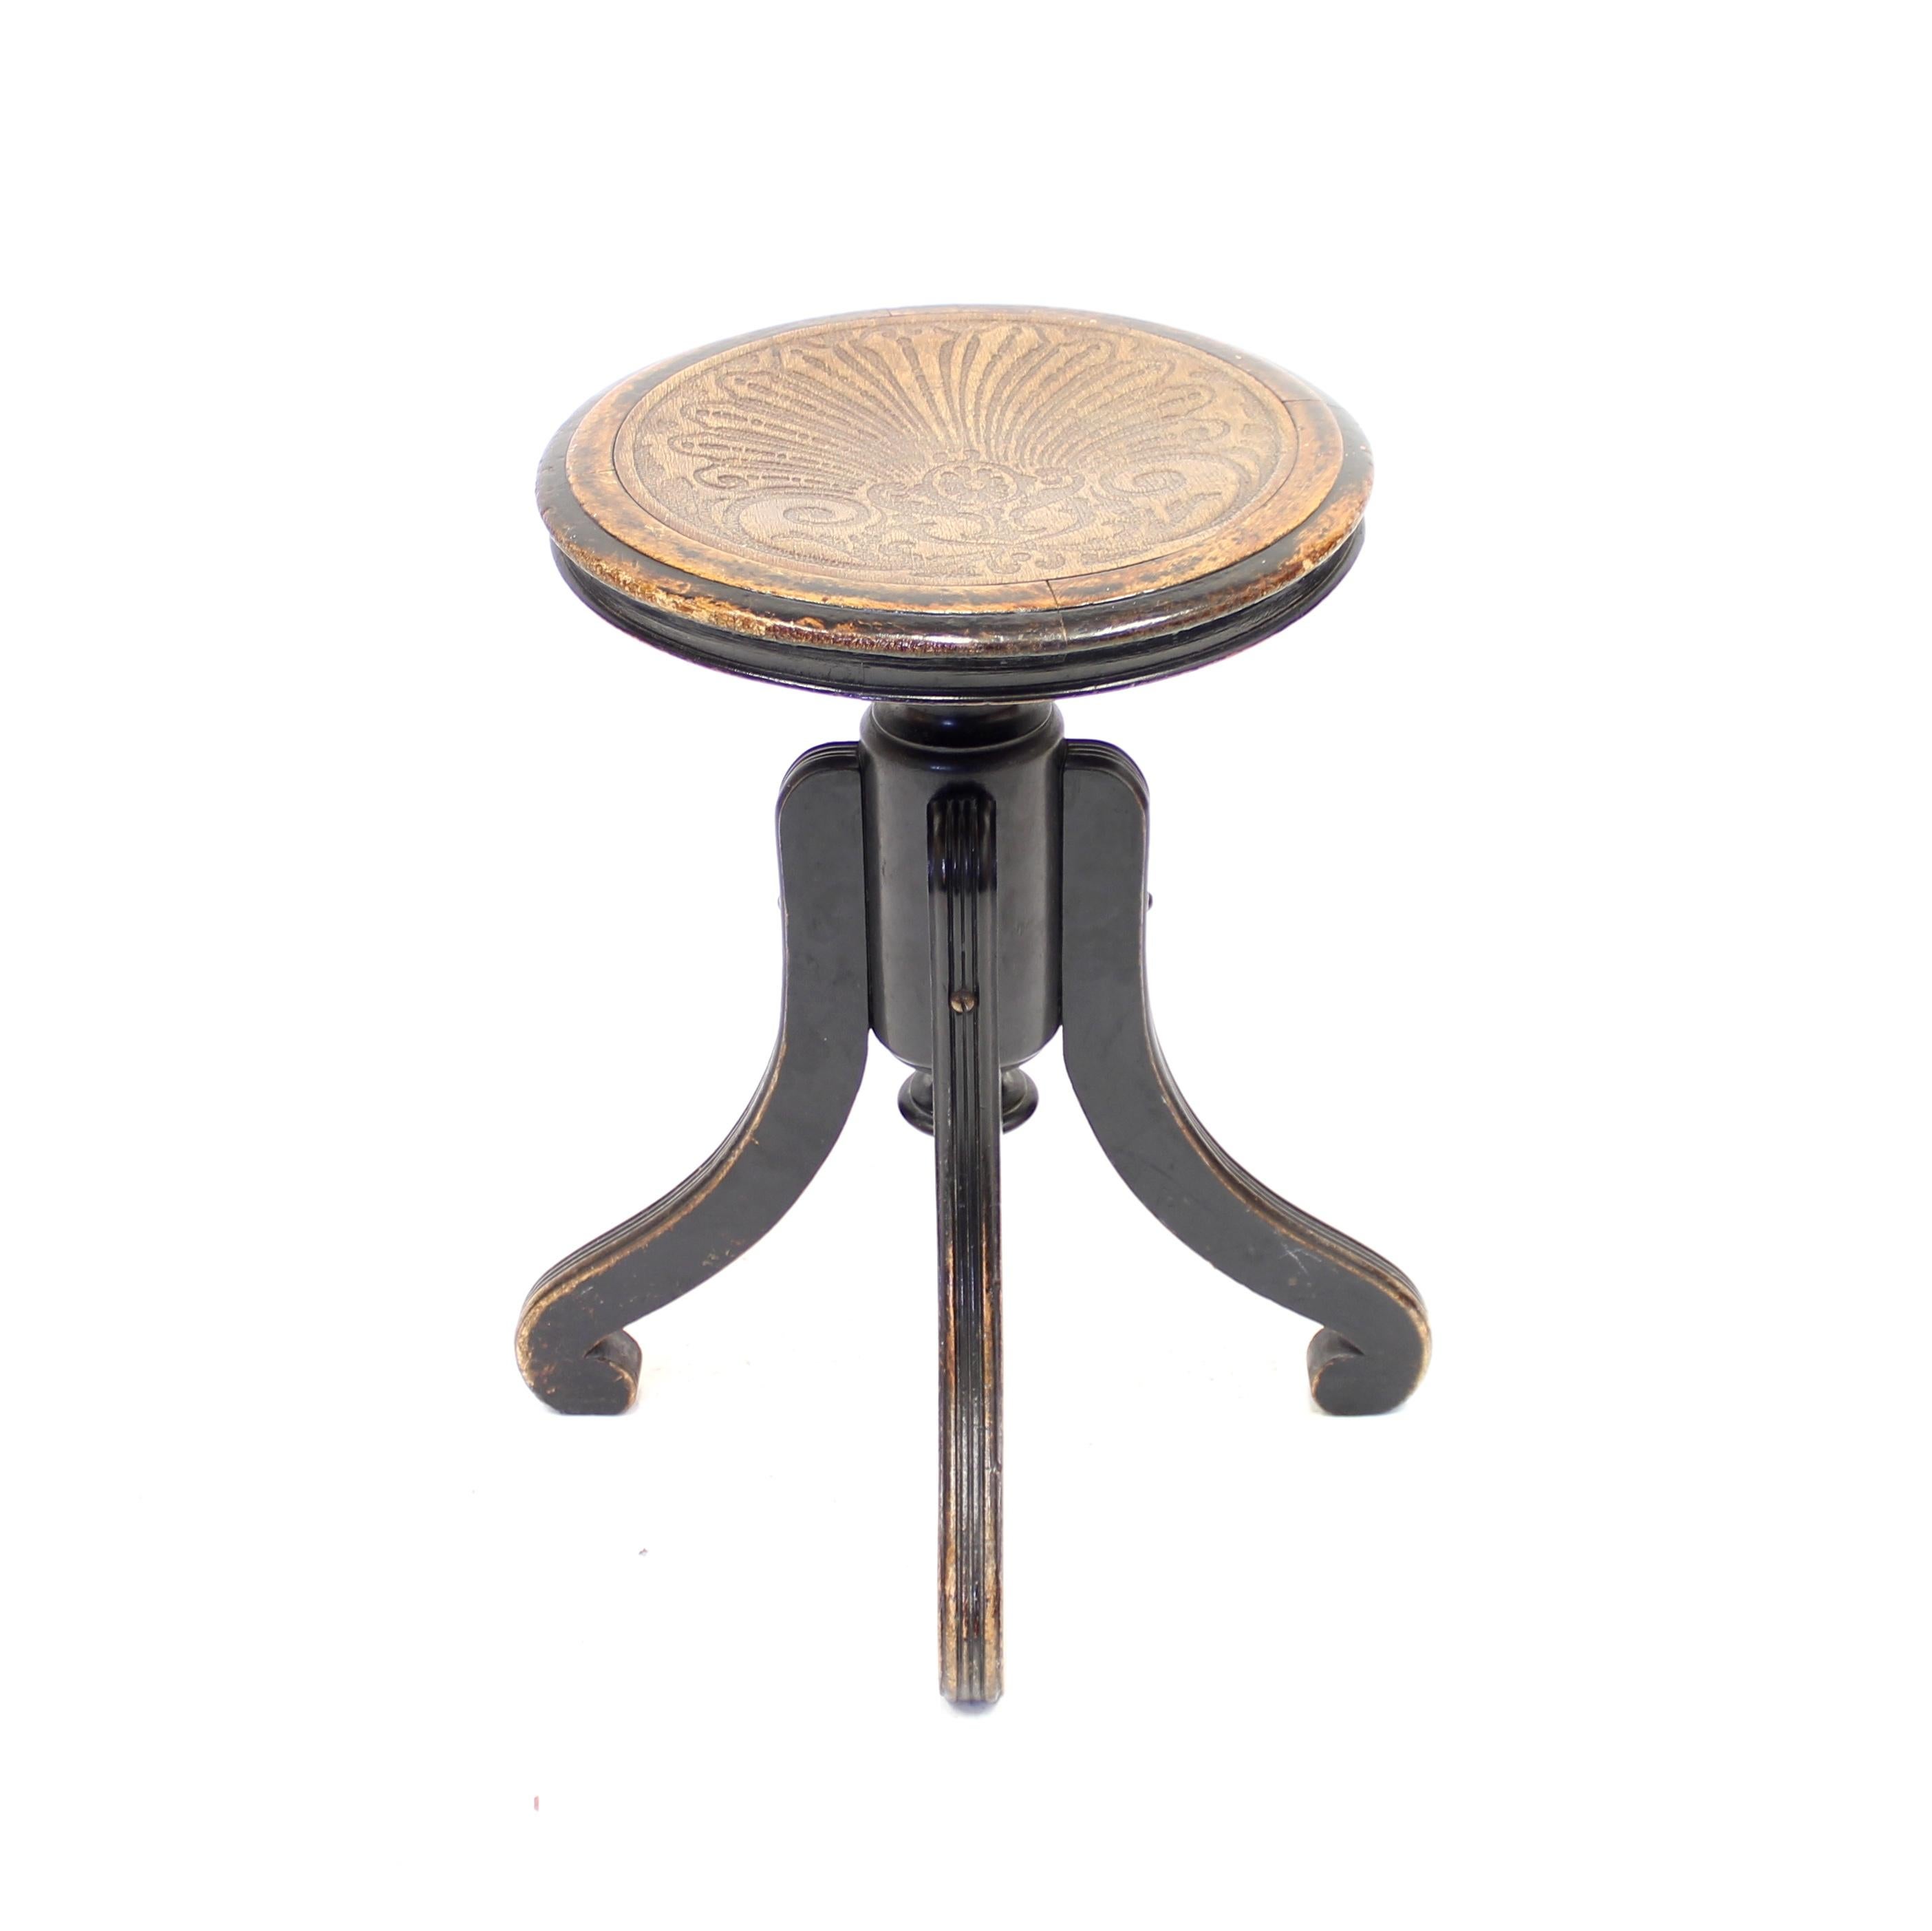 Four legged Art Nouveau stool, in the style of Thonet, with a relief pattern on the round seat. Made around the early 20th century. Base and legs made of eboniozed black lacquered birch. It also contains a little brass ring under the seat for